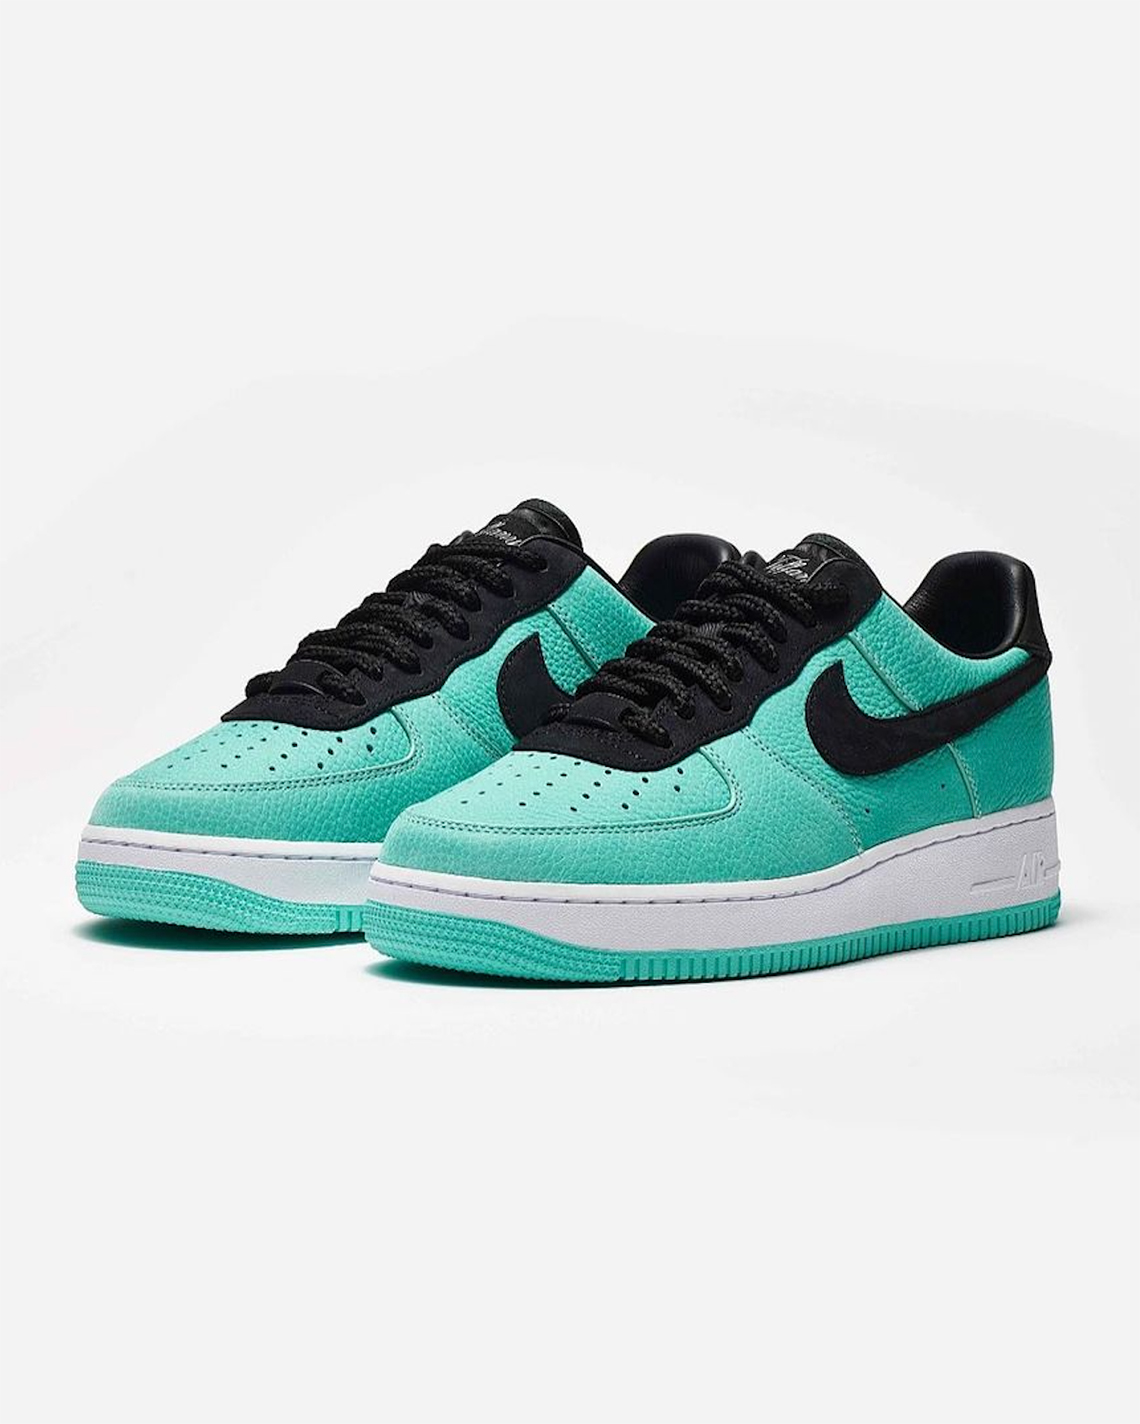 tiffany nike air force 1 friends and family blue 3